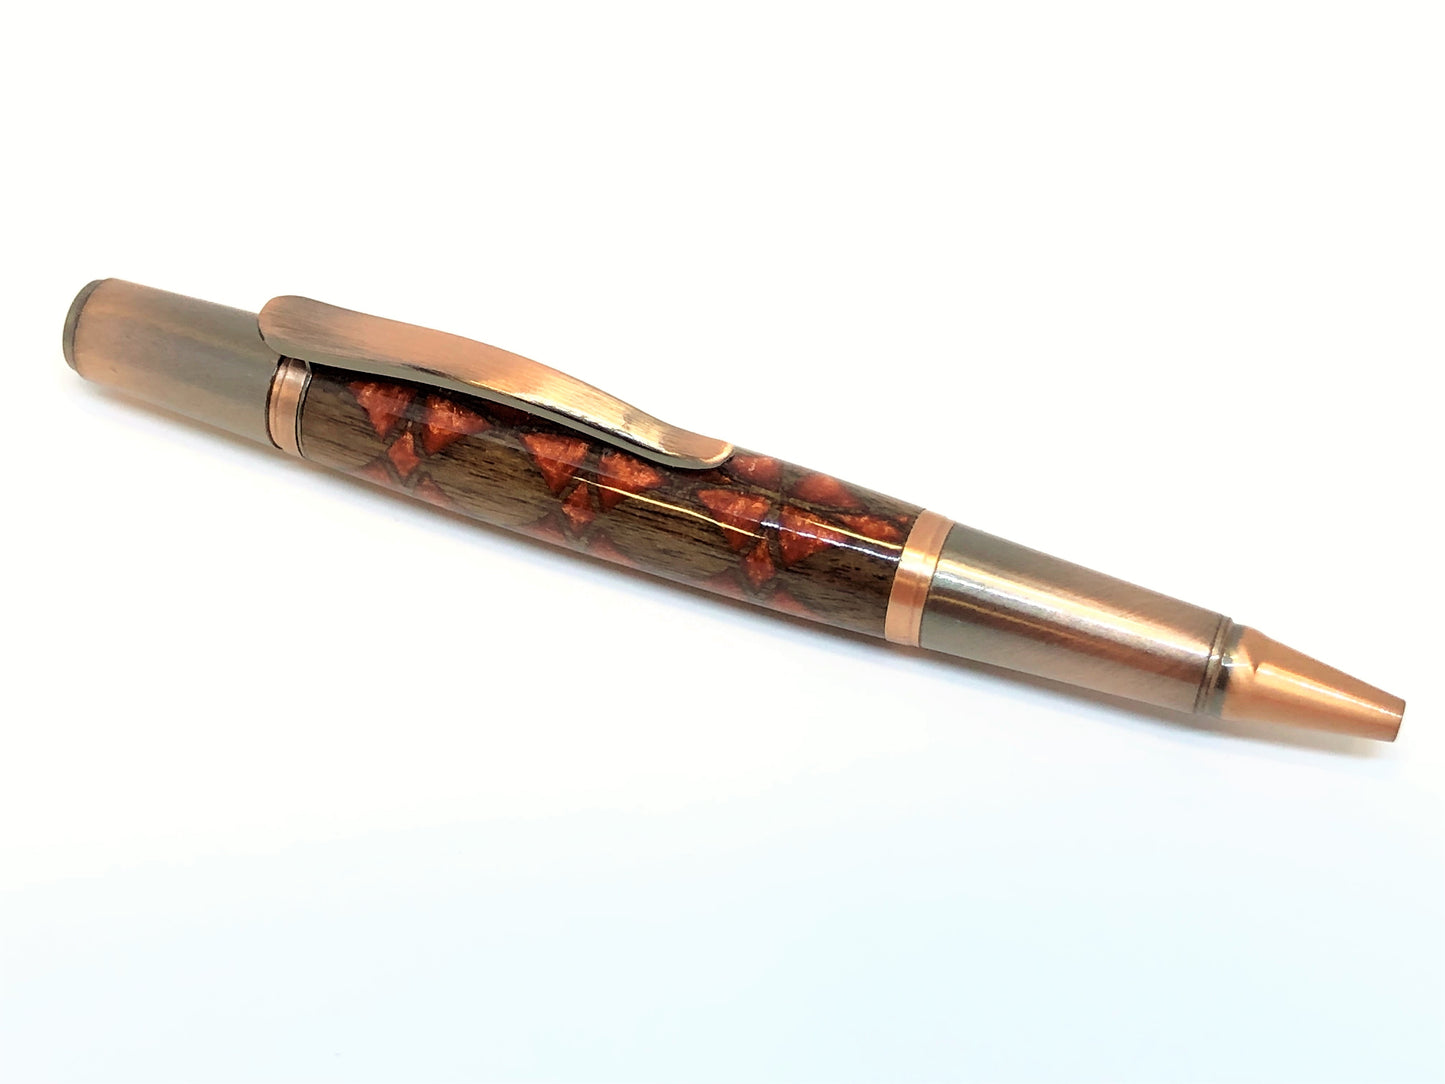 Sirocco / Antique Copper - Hybrid / Walnut Cutout and Copper Resin